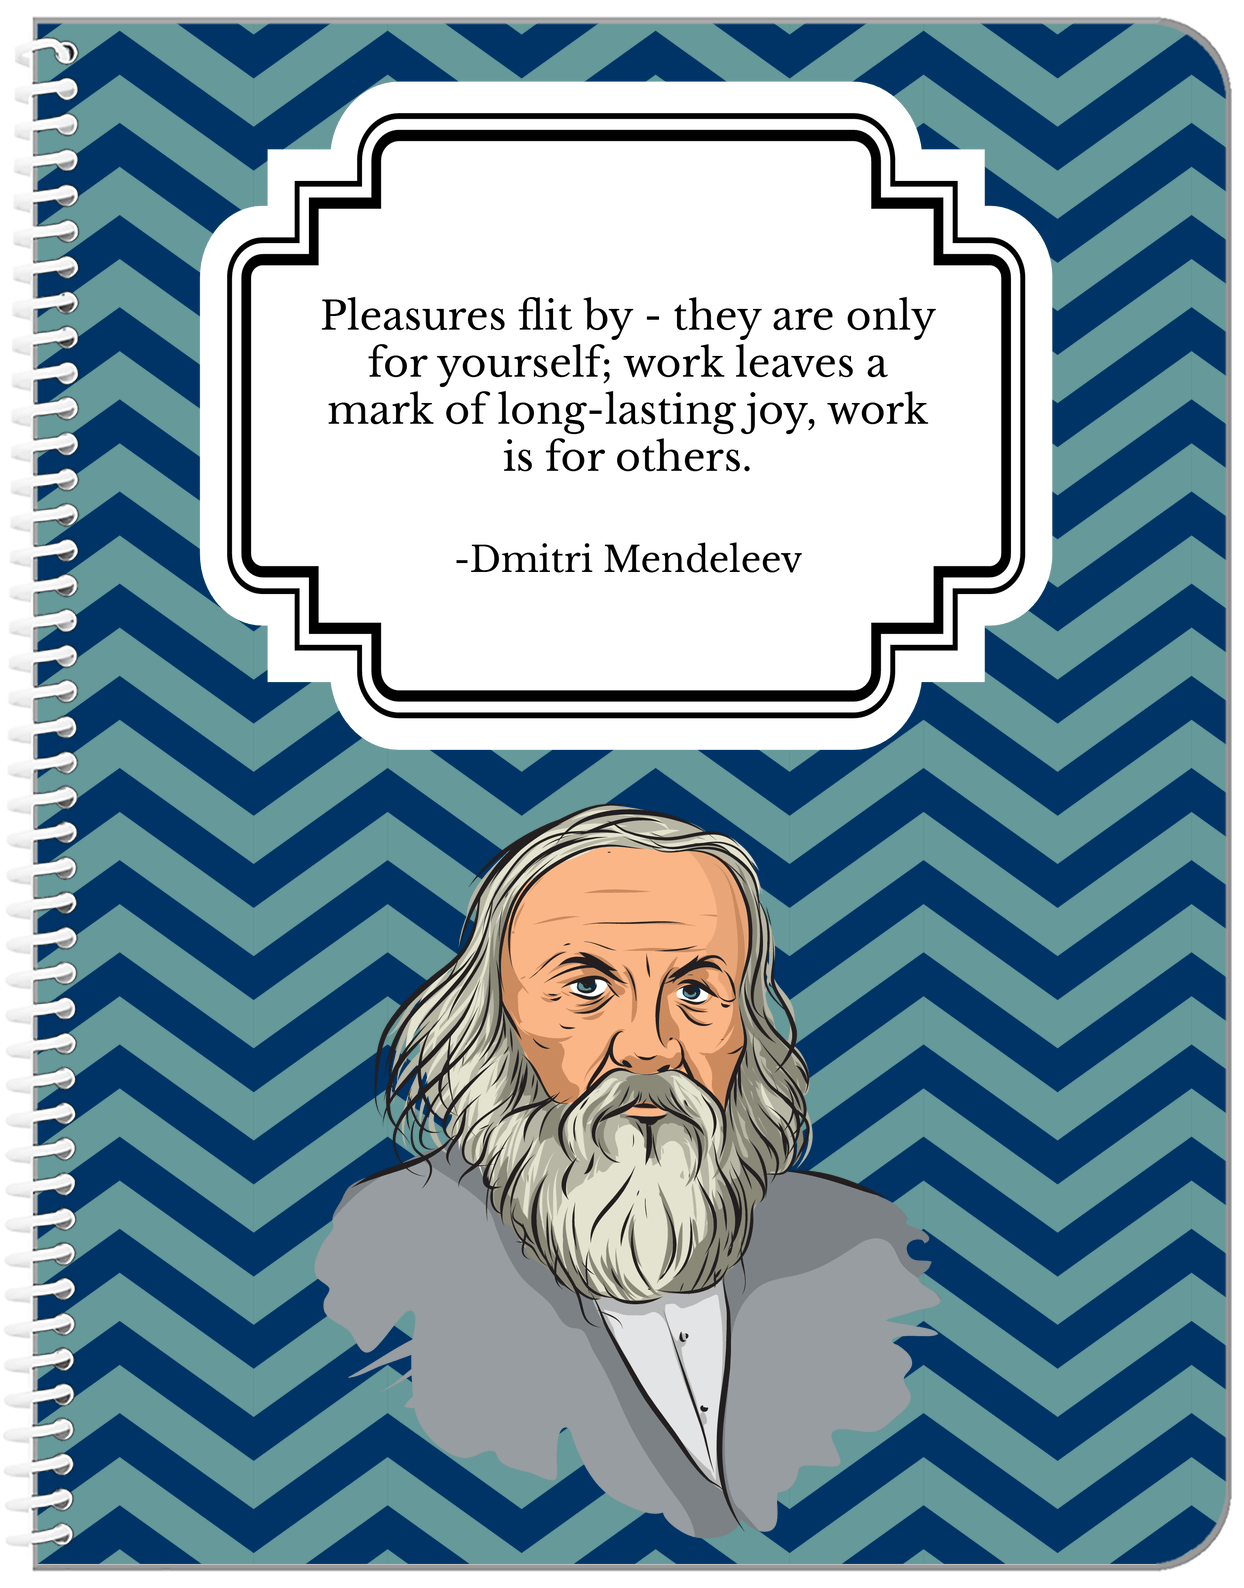 Famous Quotes Notebook - Dmitri Mendeleev - Front View